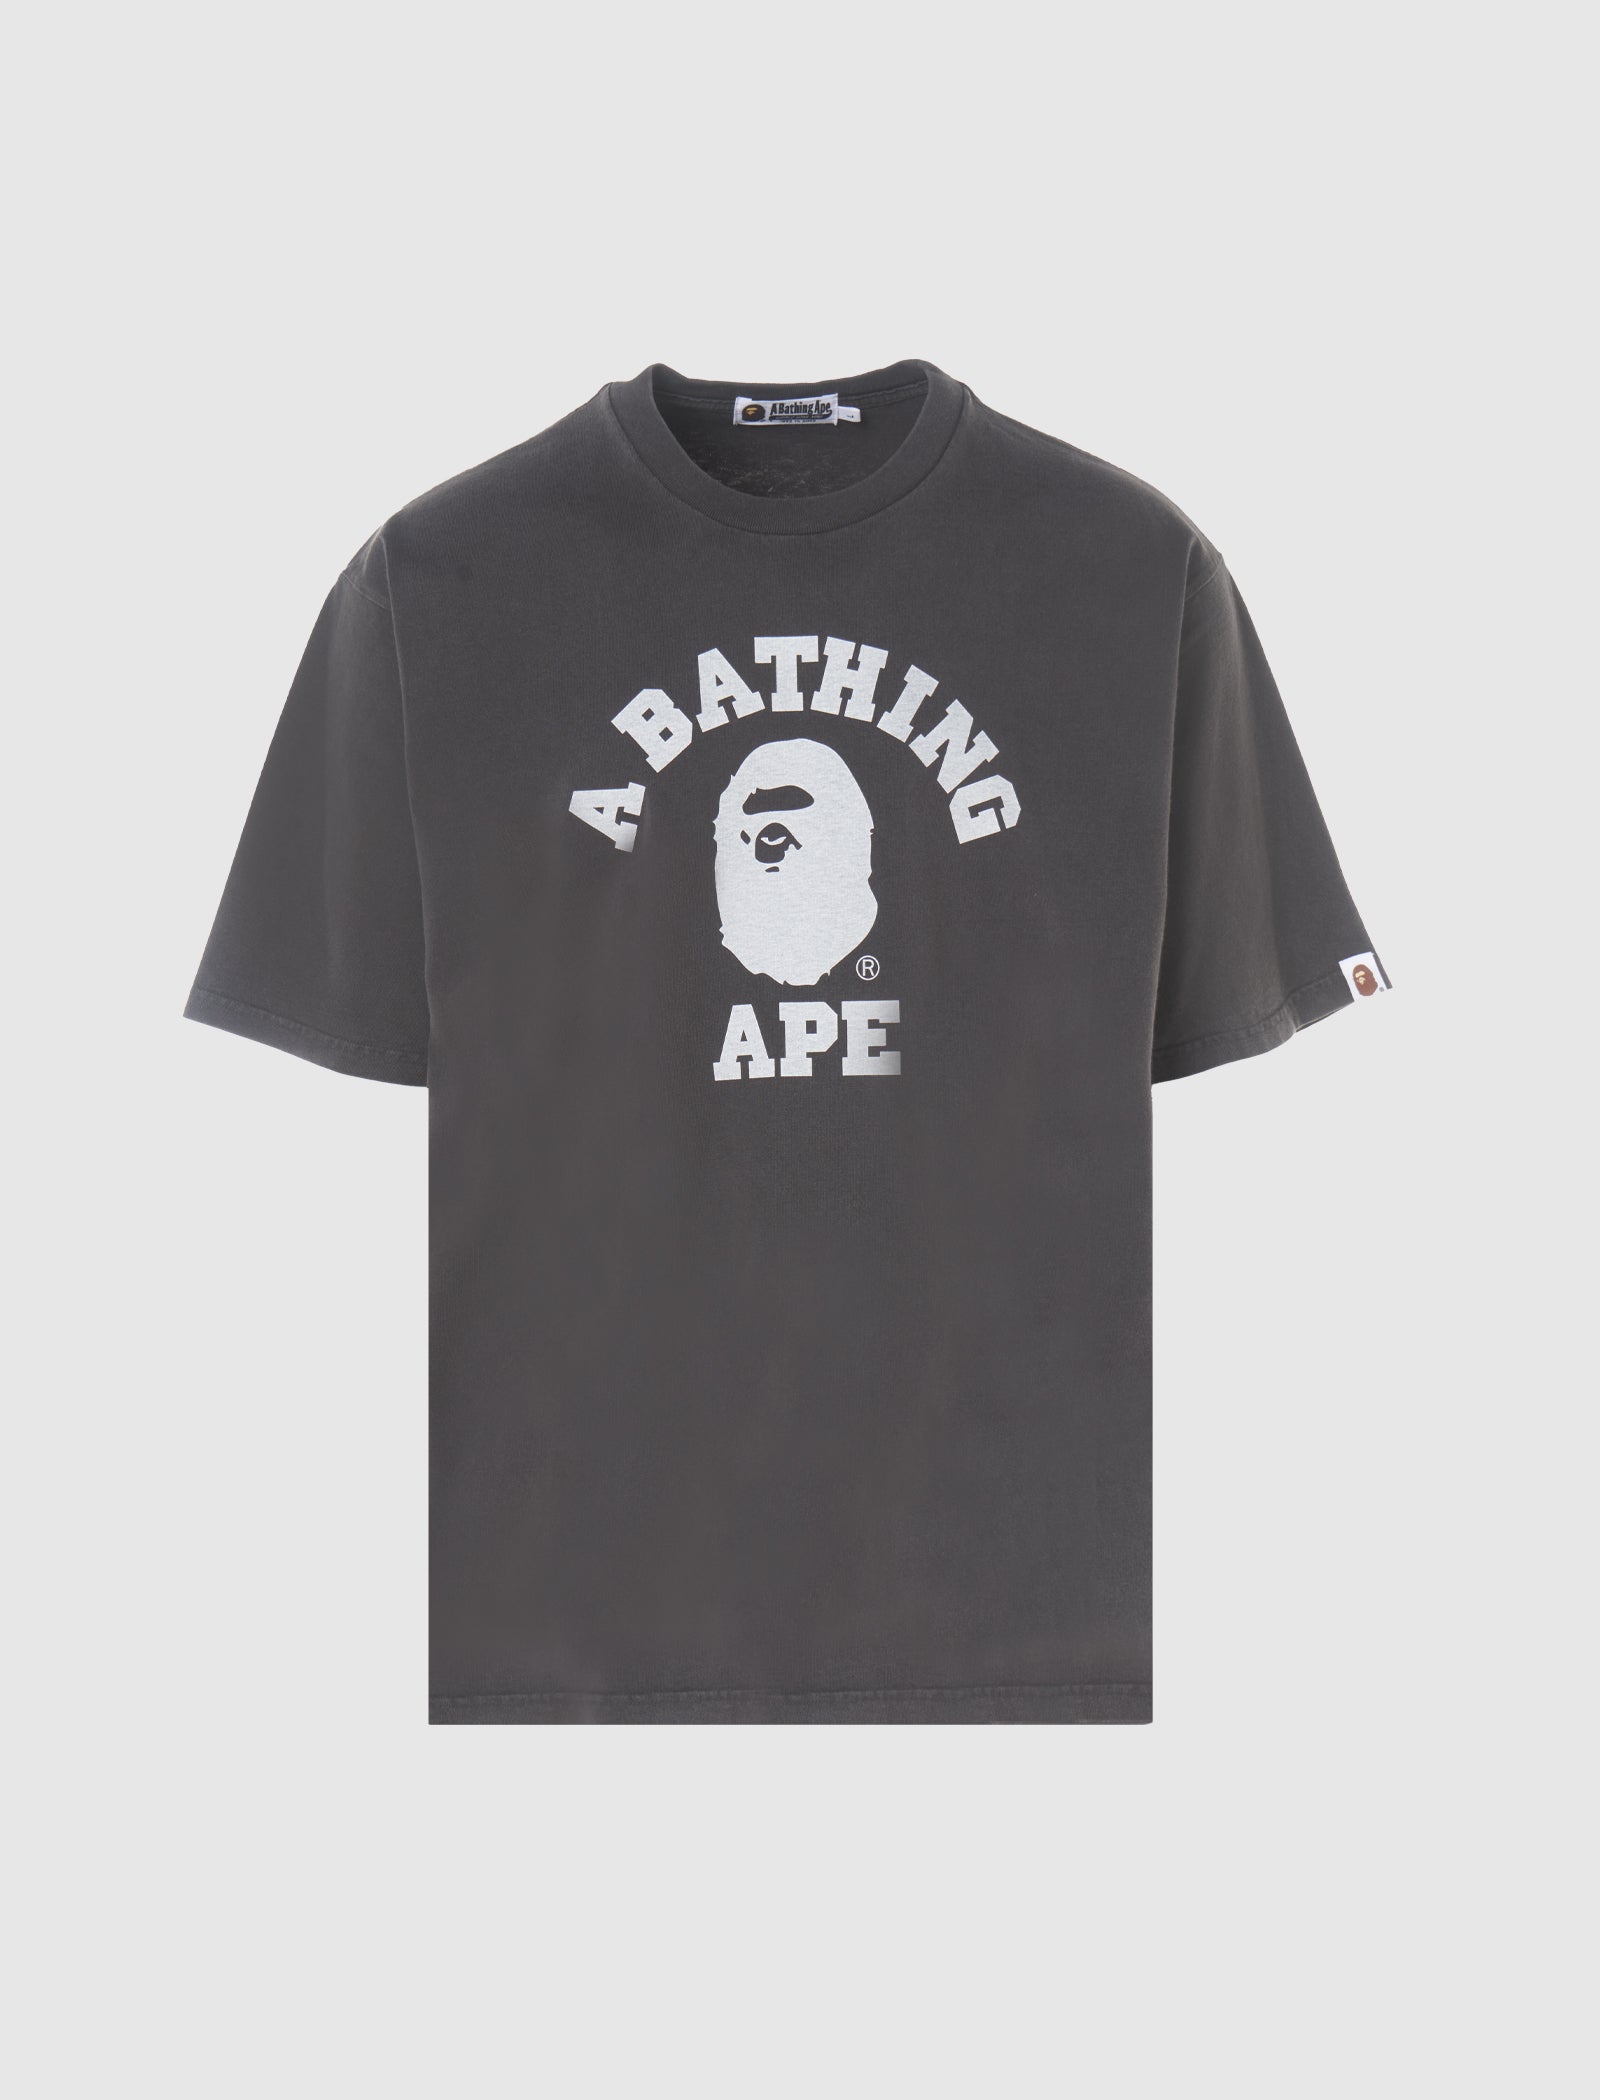 A BATHING APE PIGMENT DYED COLLEGE TEE